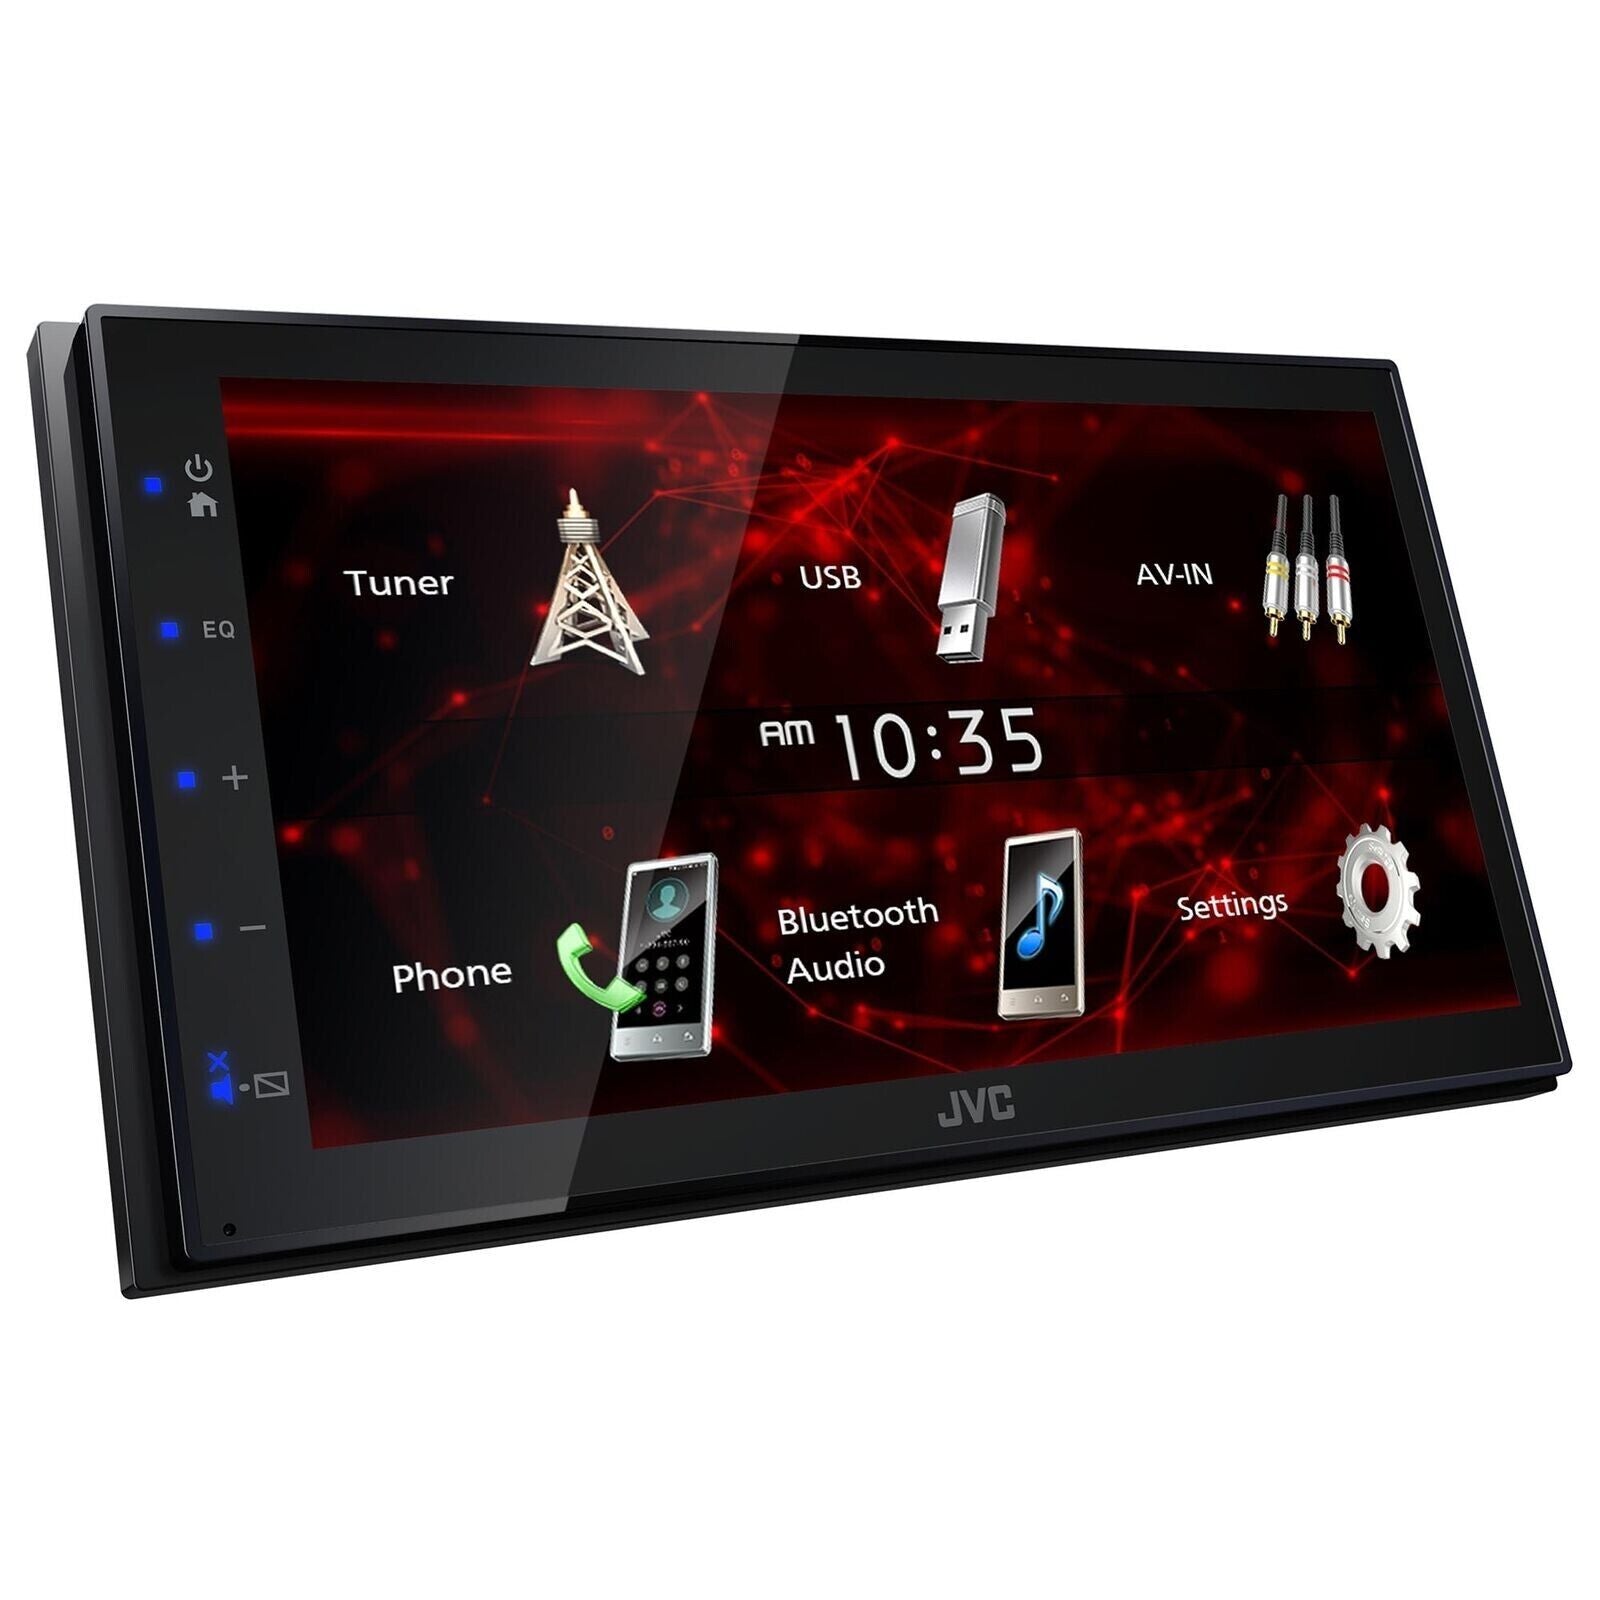 JVC KW-M180BT 2 DIN 6.75" Media Player USB Mirroring For Android Bluetooth + CAM900 Backup Camera